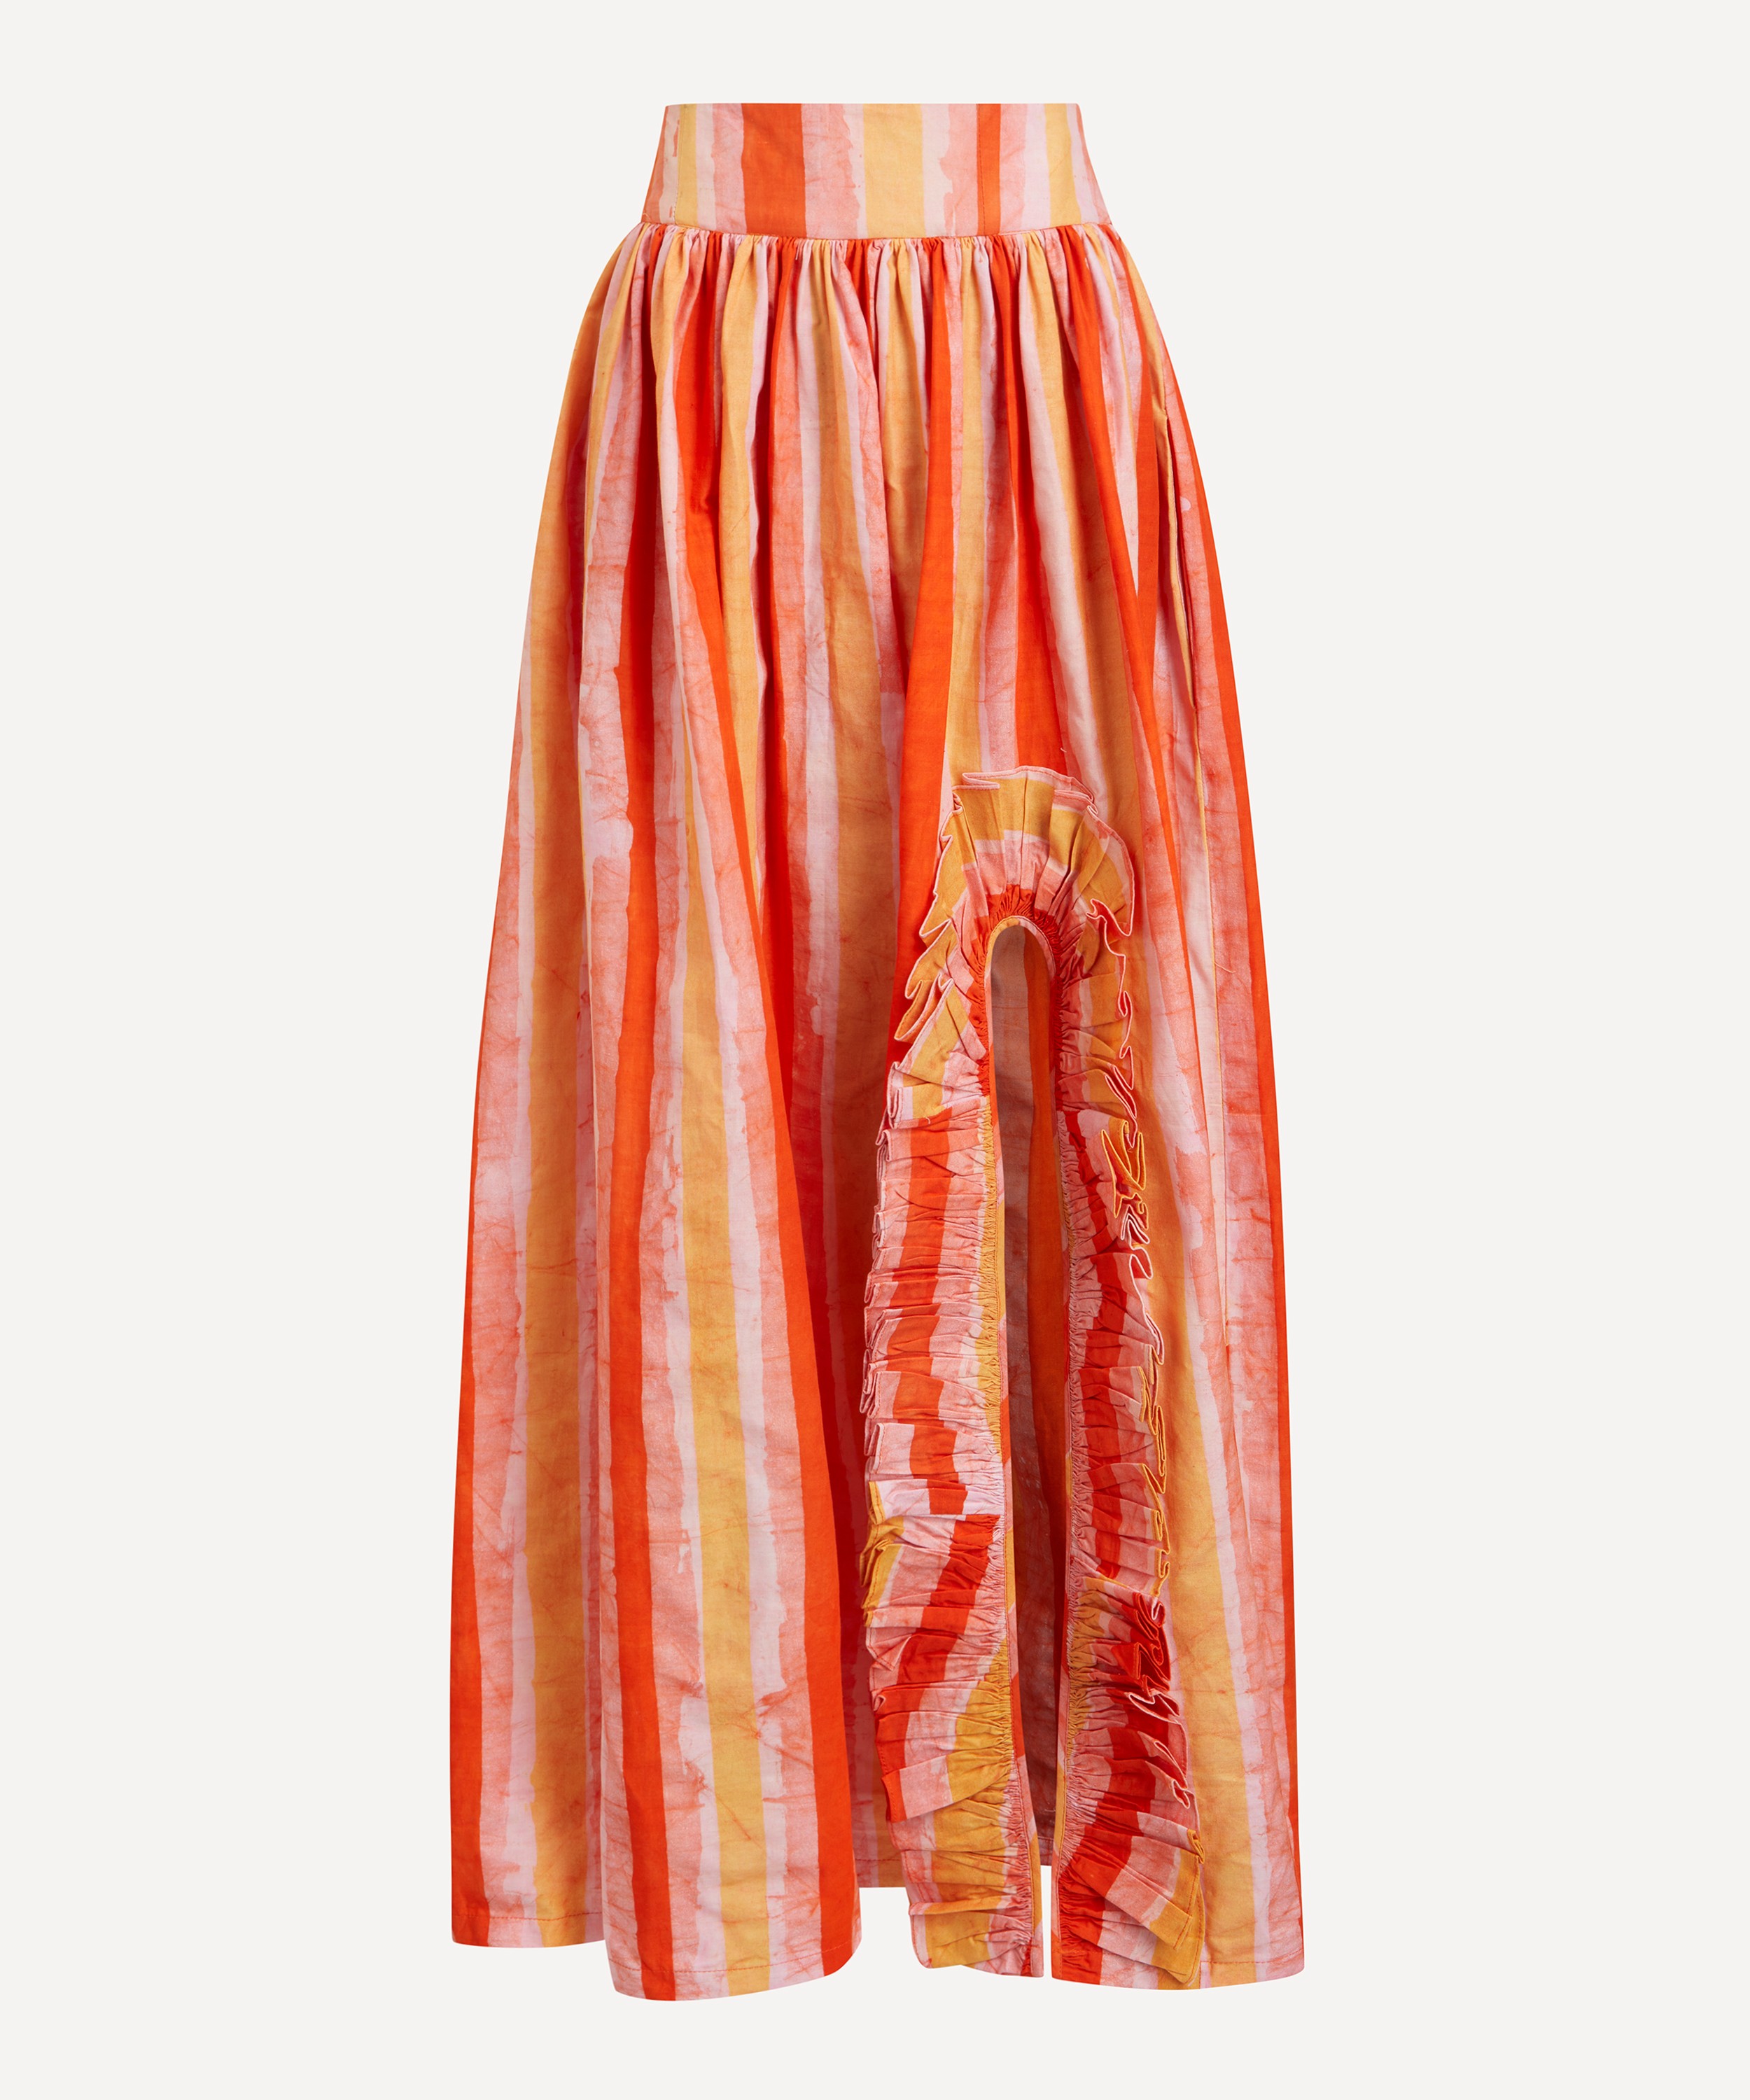 Sika - Aneesa Red Striped Skirt image number 0